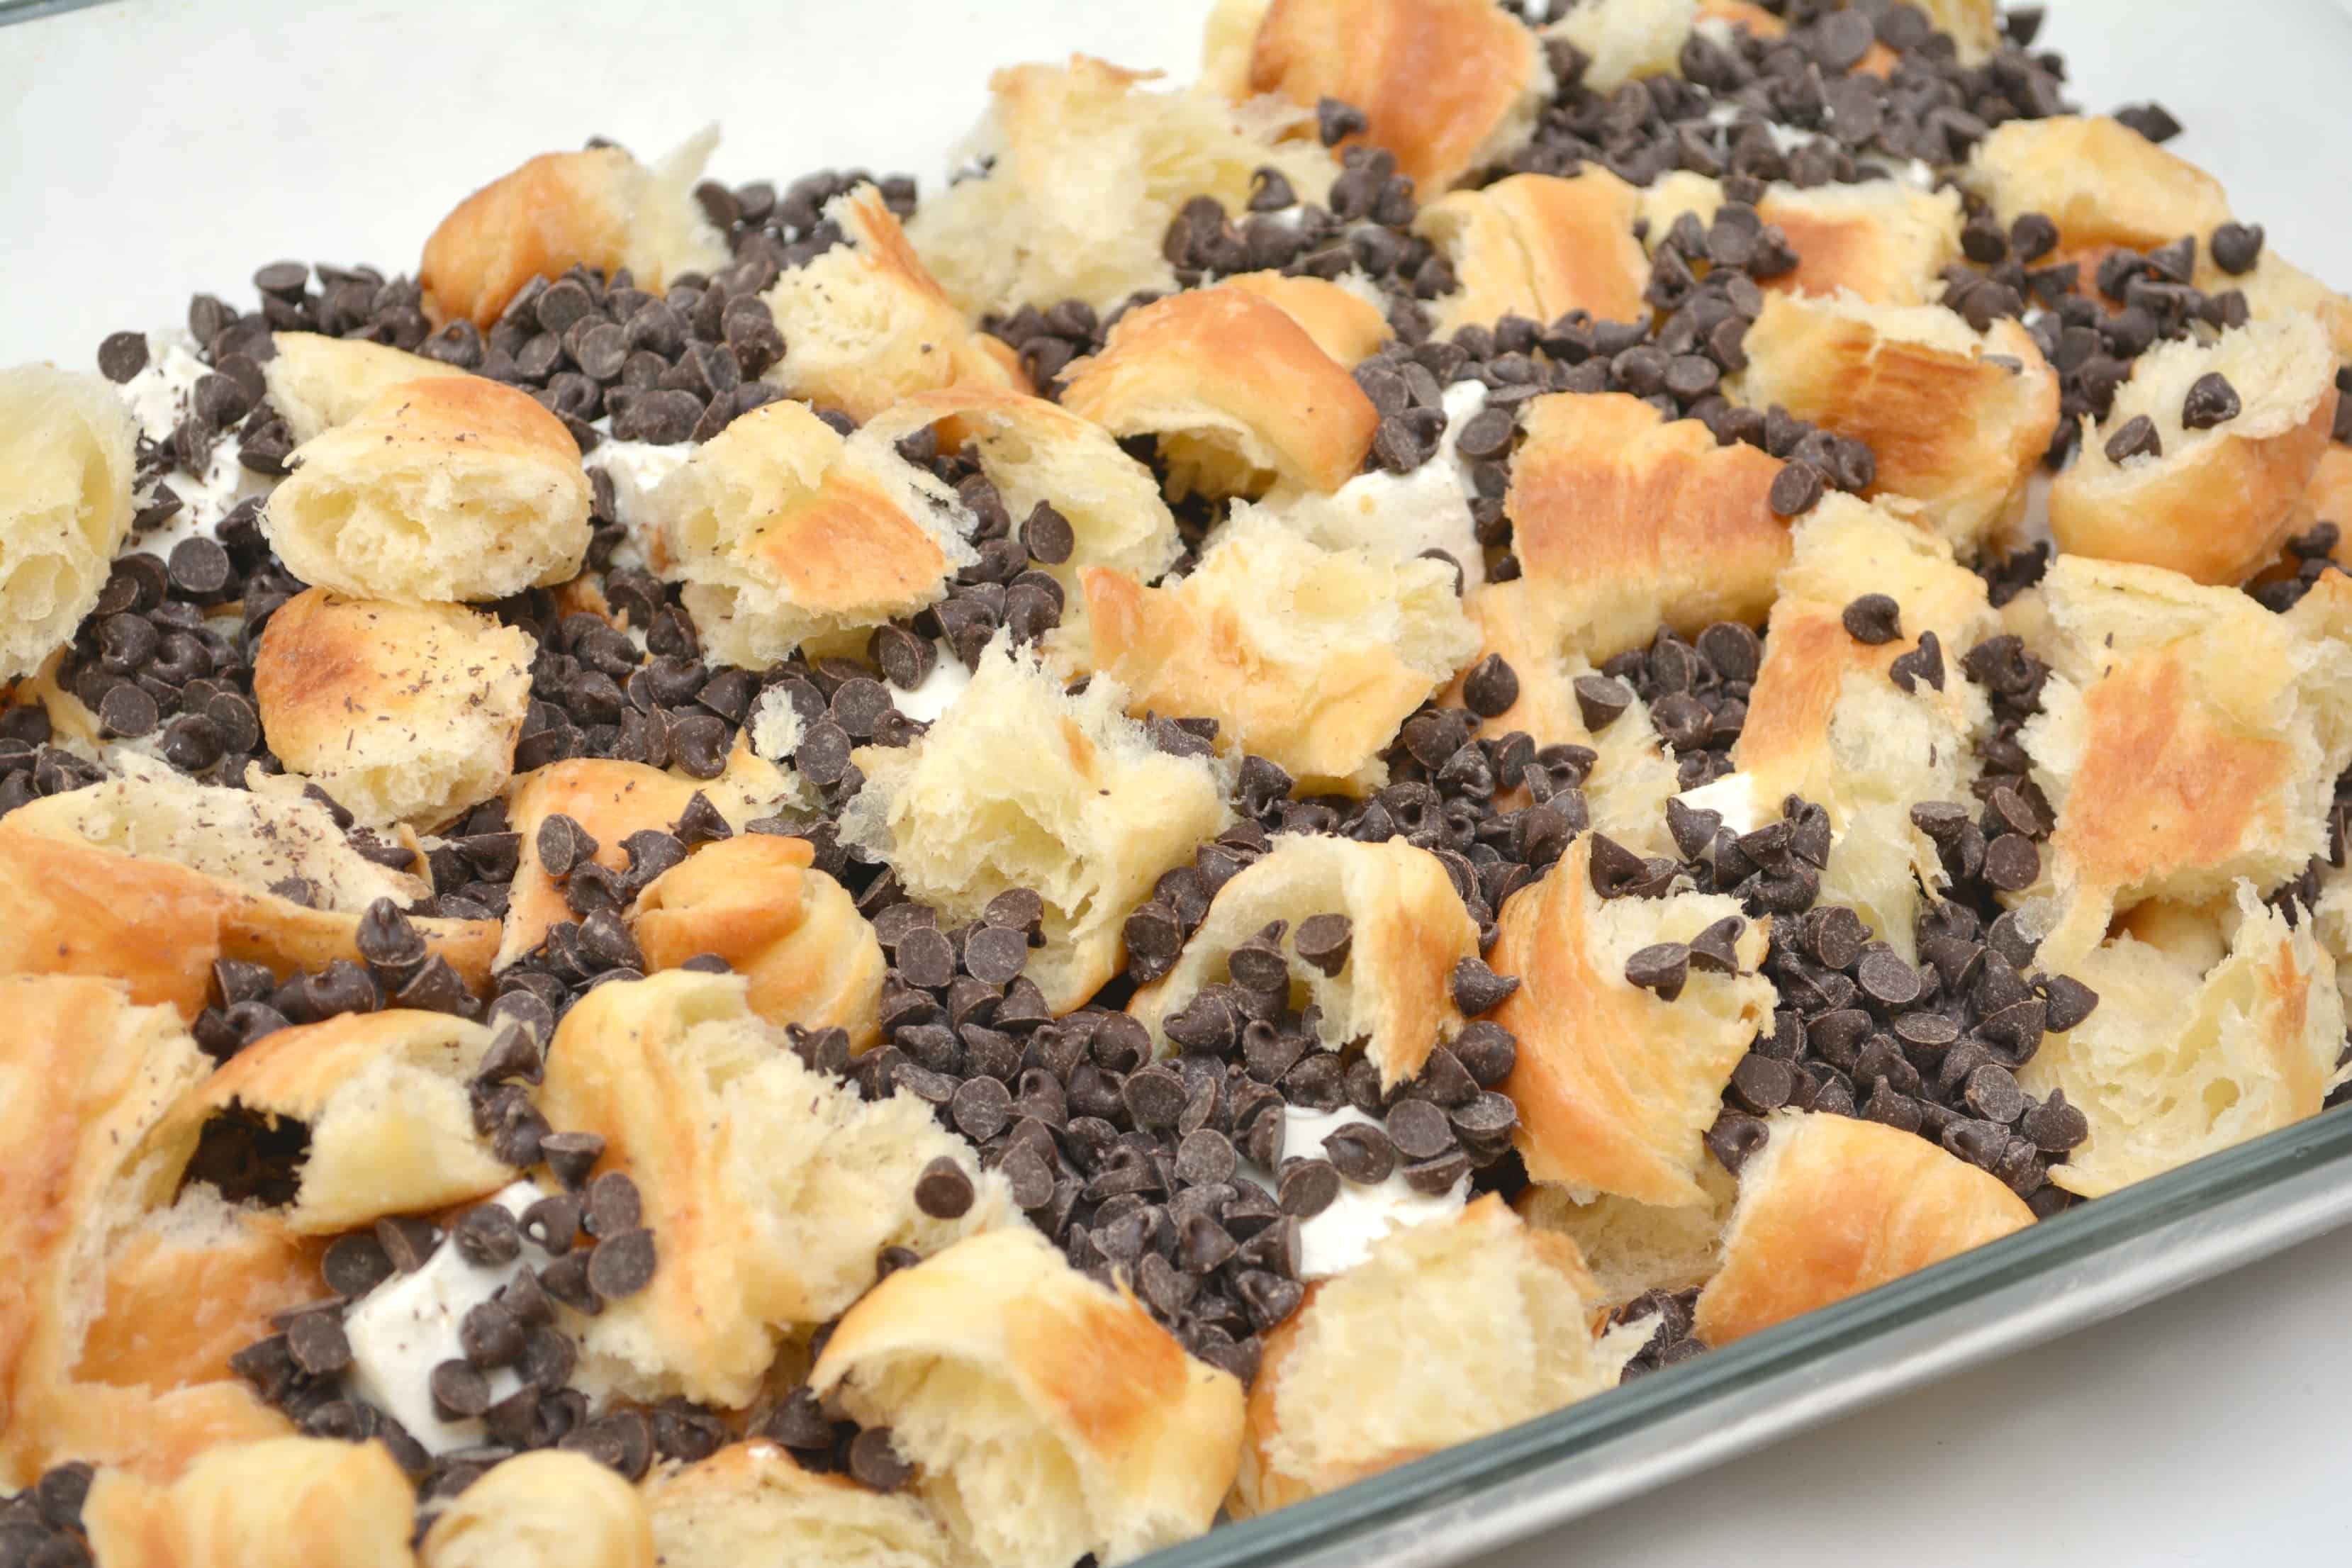 Chocolate chips and Croissants in a baking dish